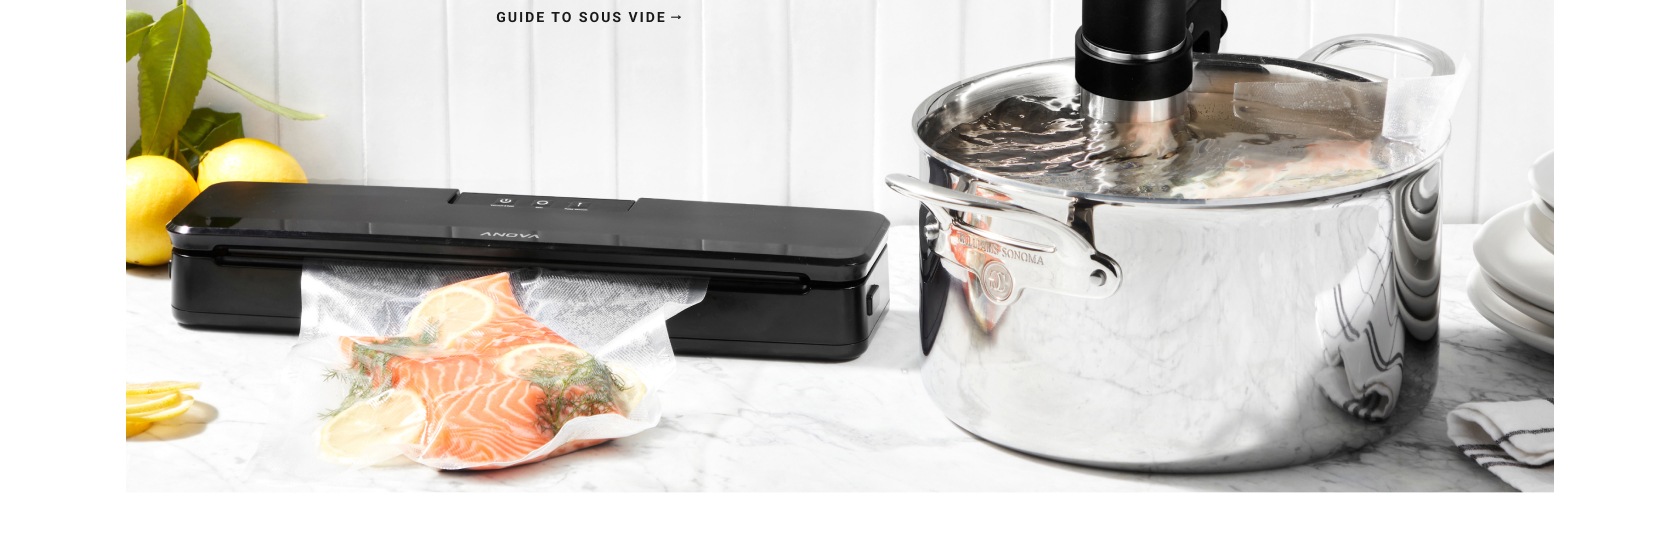 Guide to Sous Vide Cooking